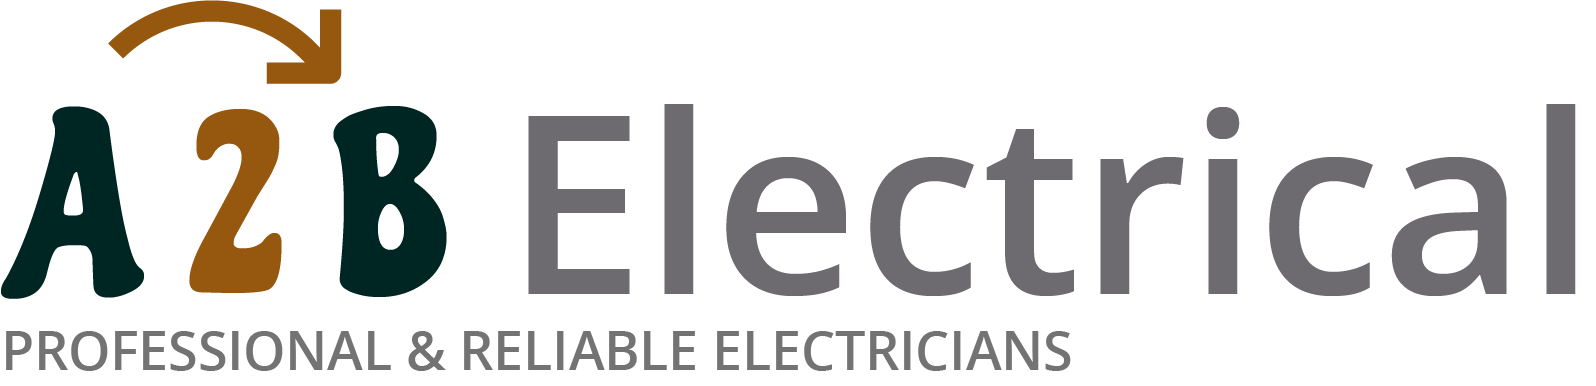 If you have electrical wiring problems in Peckham, we can provide an electrician to have a look for you. 